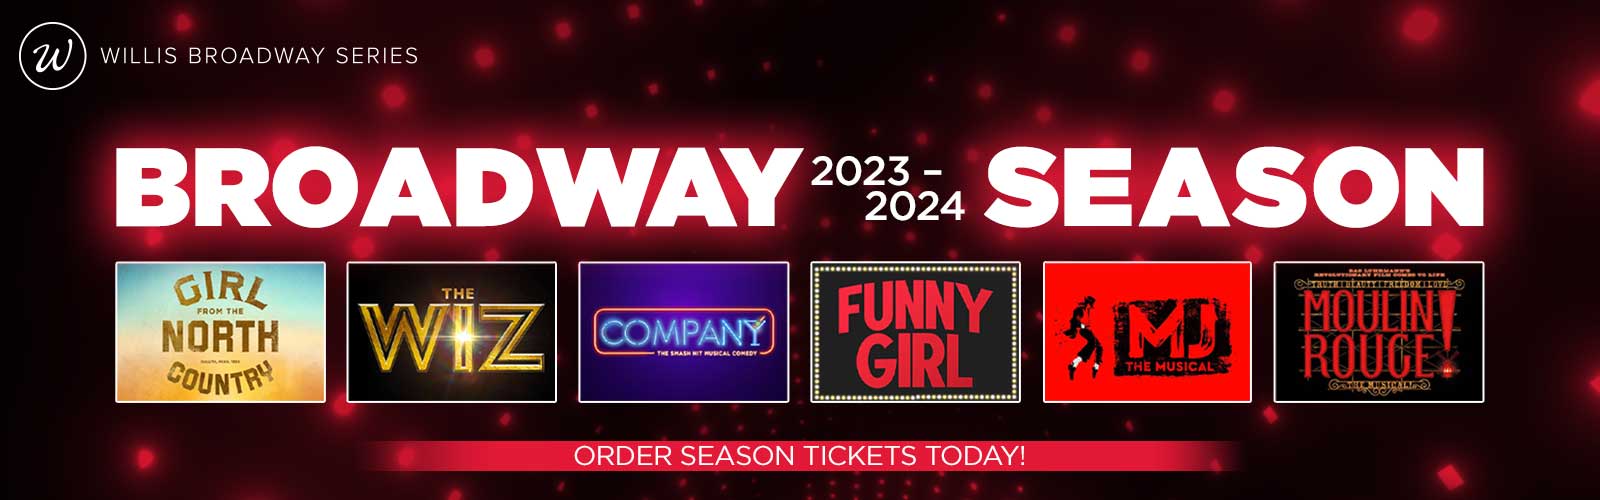 Broadway 2023-2024 tickets are on sale now!